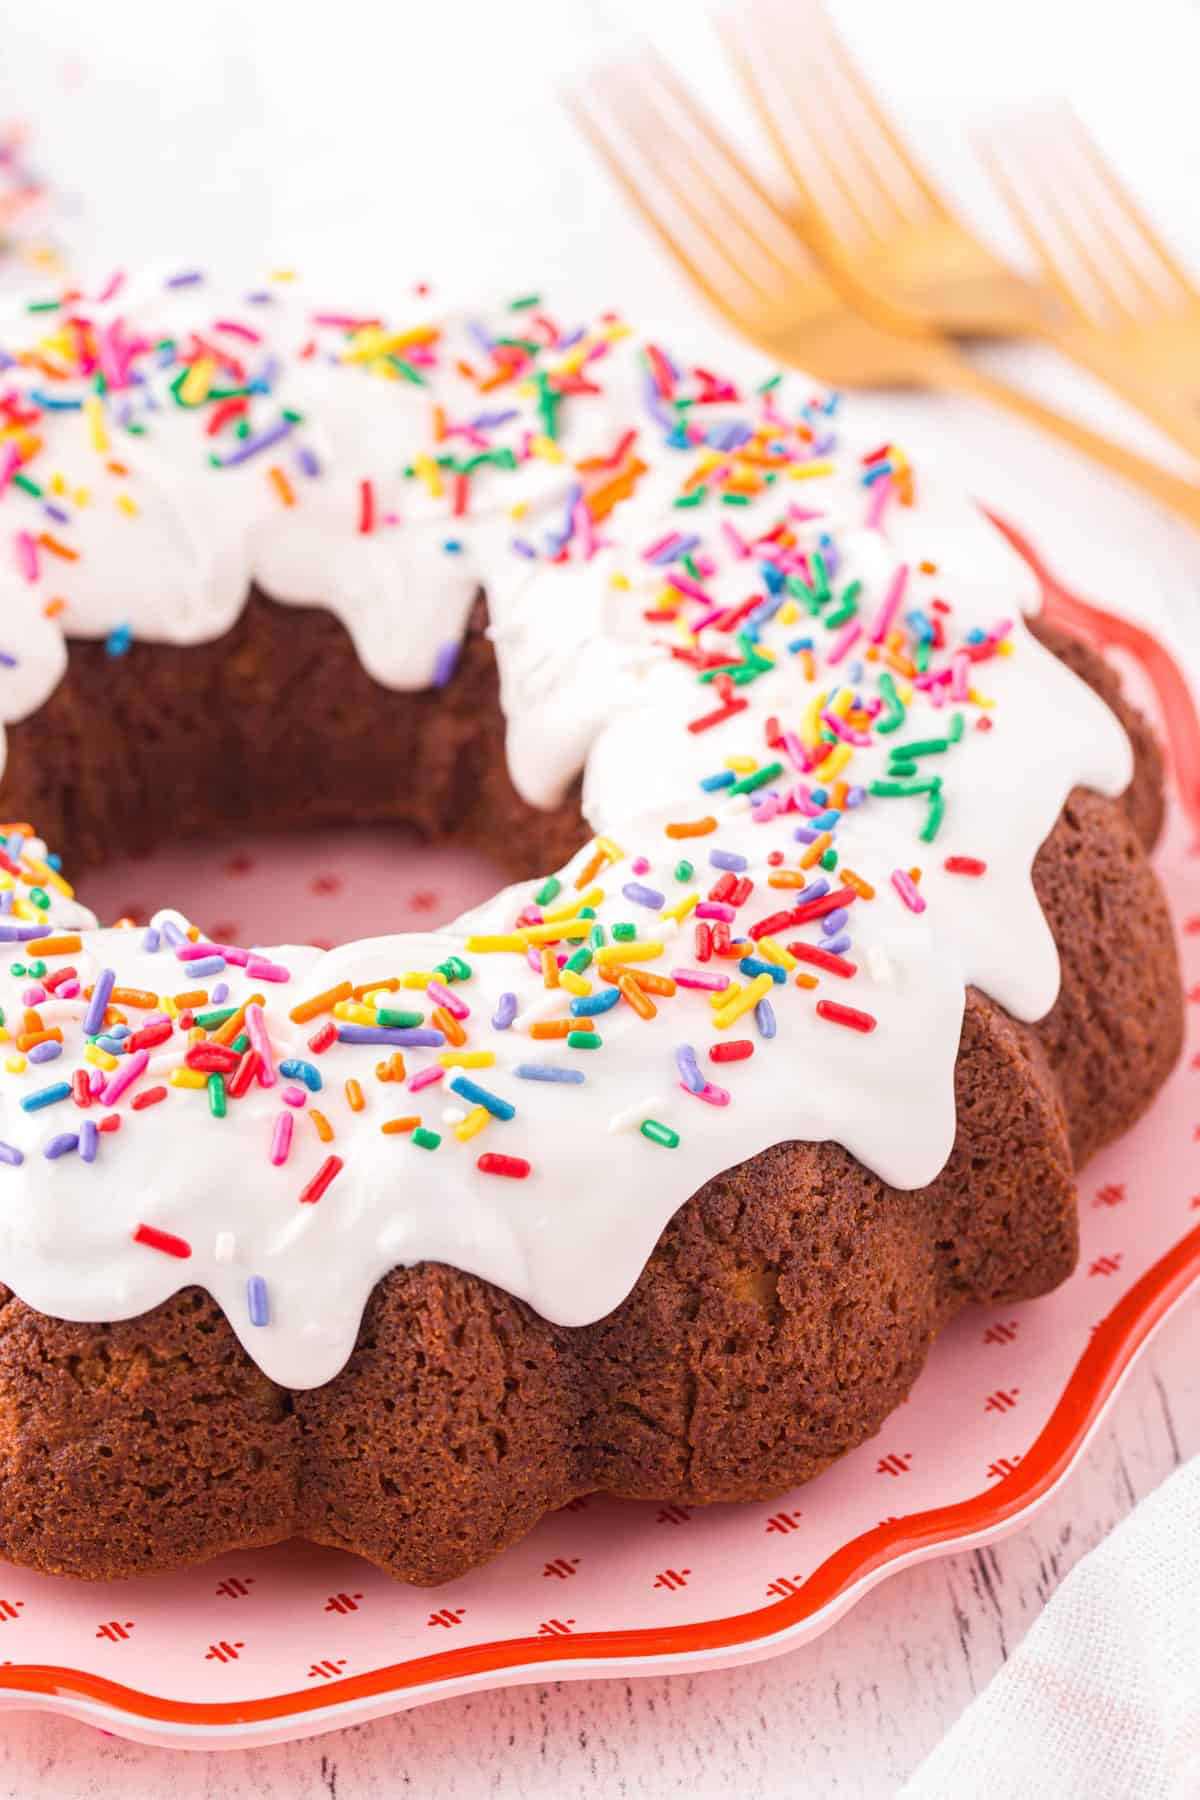 Pour the glaze on top and add sprinkles.